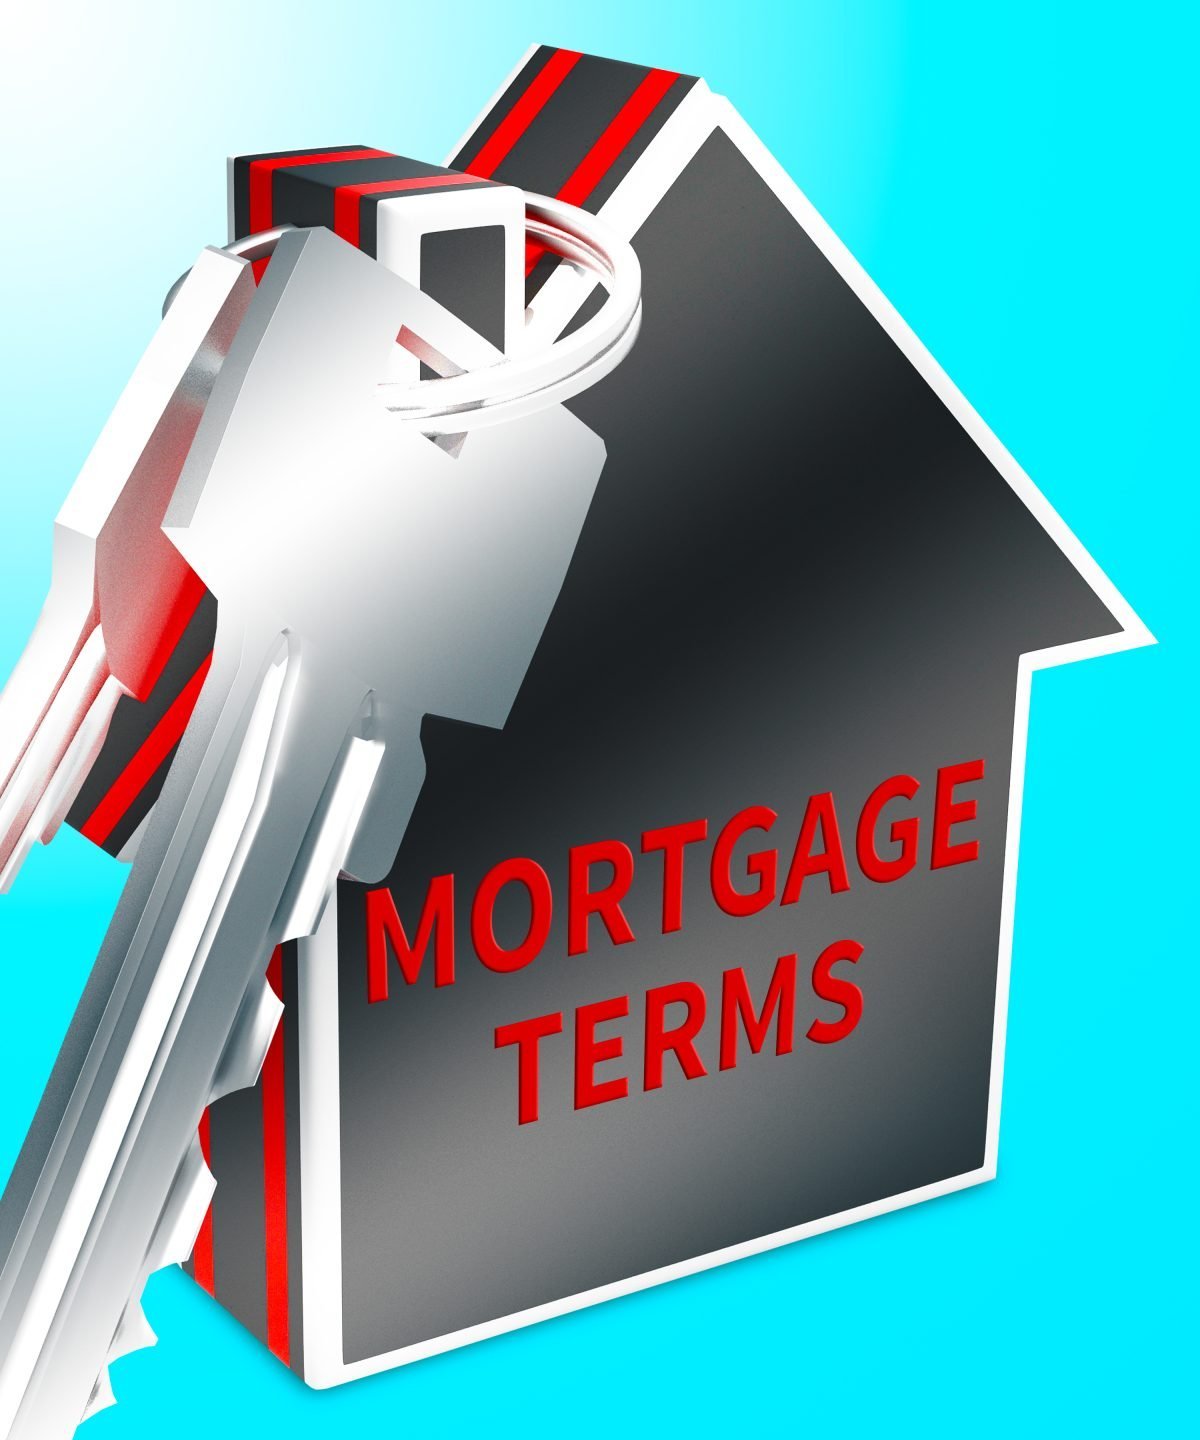 2 Mortgage Terms to Know as a First Time Home Buyer